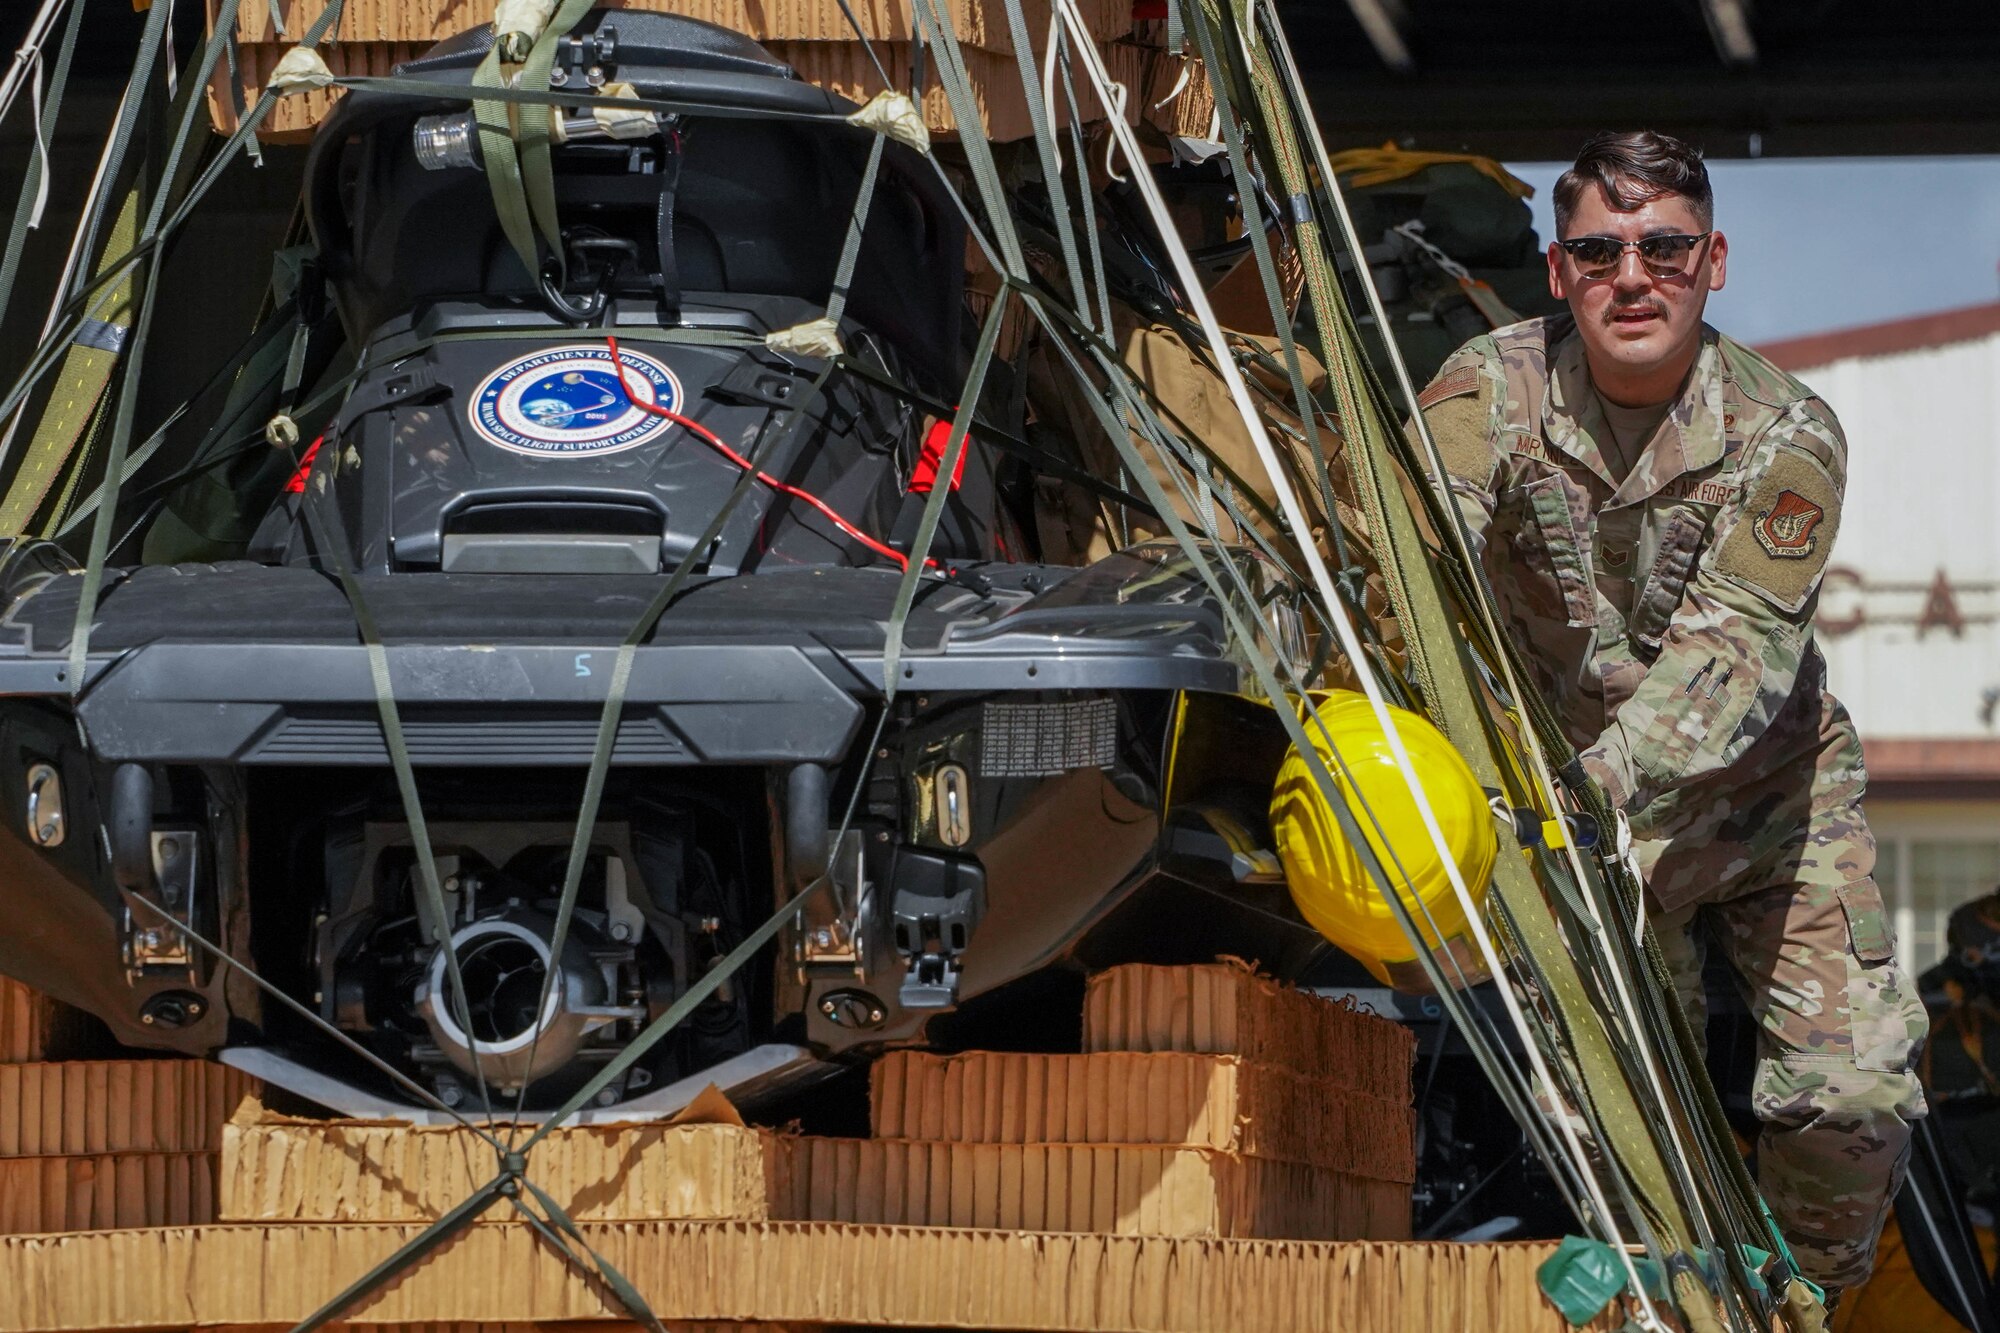 Staff Sgt. Jonathan Martinez, 647th Logistics Readiness Squadron combat mobility flight supervisor, loads a jetski onto a K-loader trailer to support the NASA Human Space Flight Crew 2 return and Space Flight Crew 3 if required at Joint Base Pearl Harbor-Hickam, Hawaii, Oct. 29, 2021. The 647th LRS uploaded life-saving rescue equipment to ensure it is ready at a moment’s notice to safeguard astronauts taking off and returning to Earth from the International Space Station. (U.S. Air Force photo by Airman 1st Class Makensie Cooper)